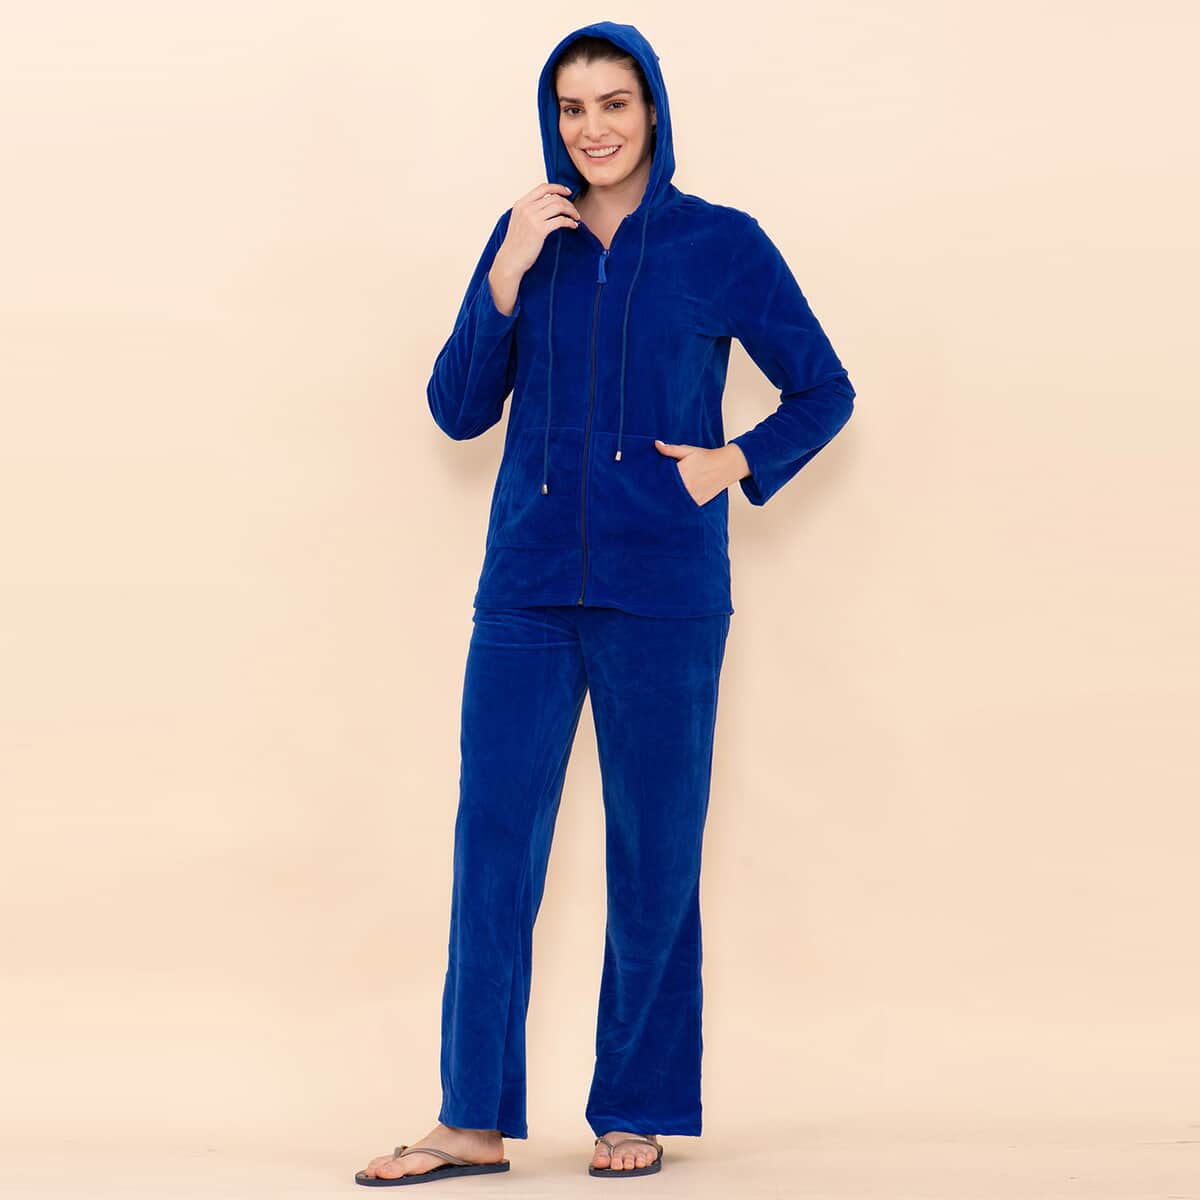 Tamsy LUX Blue Velour Track Suit Set - 1X image number 4